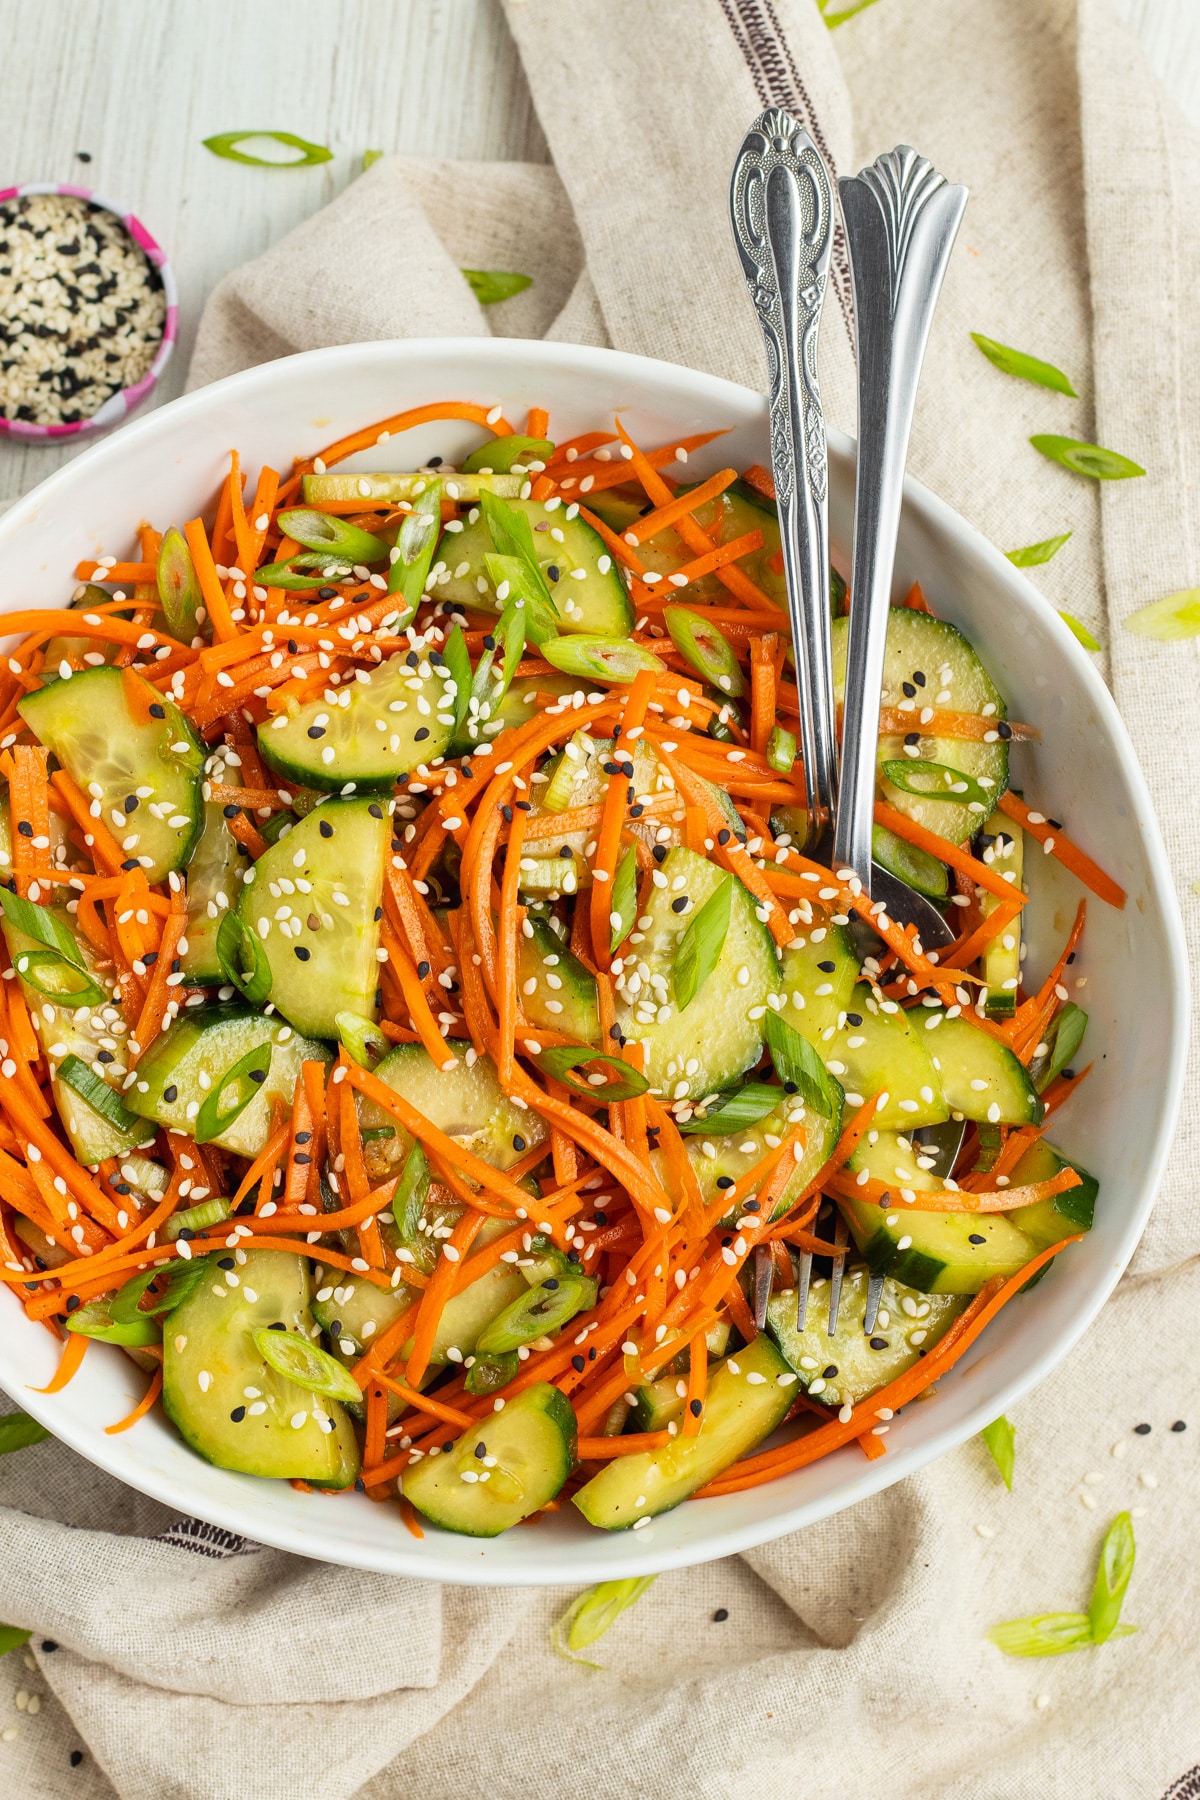 This is picture of cucumber and carrot salad in a bowl.